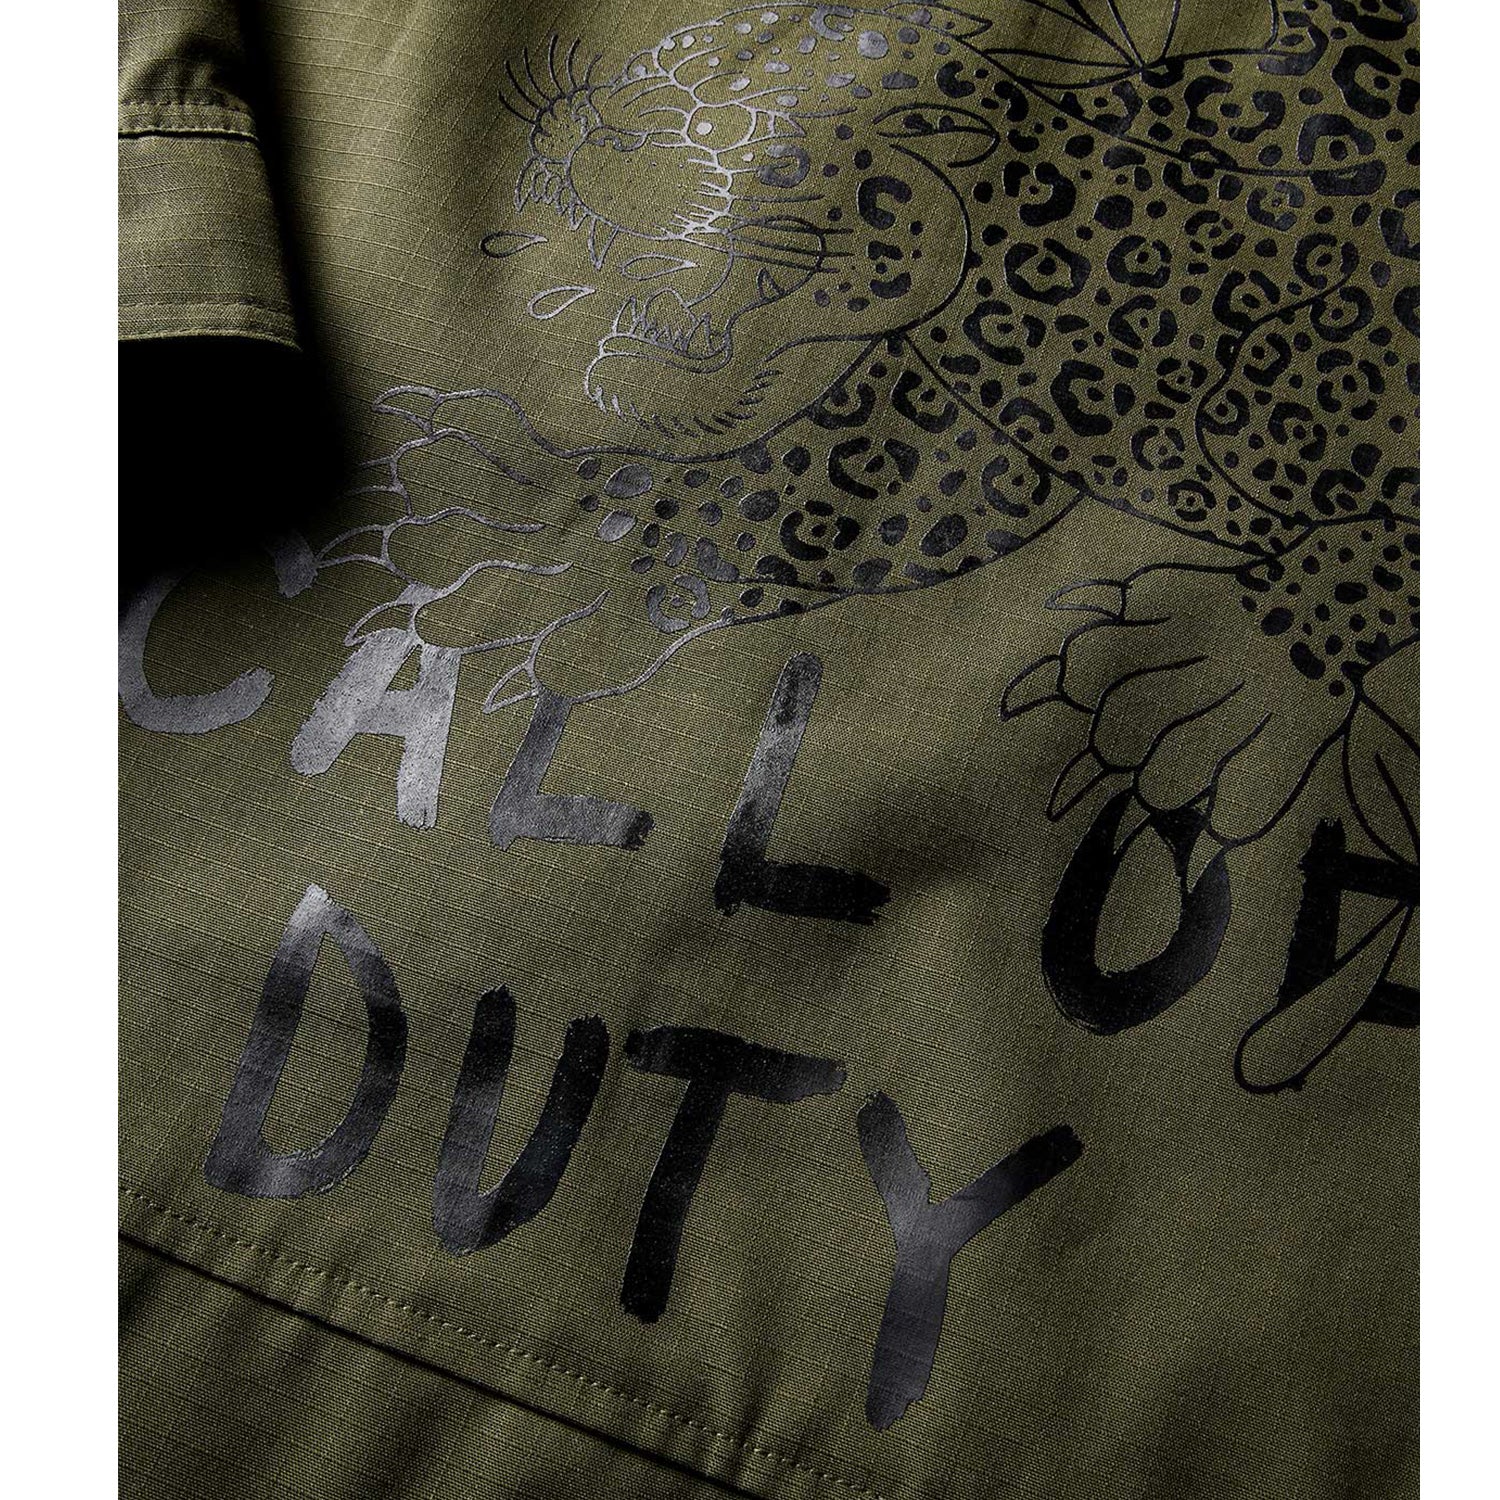 Call of Duty Military Green Task Force Jacket - Close-Up View